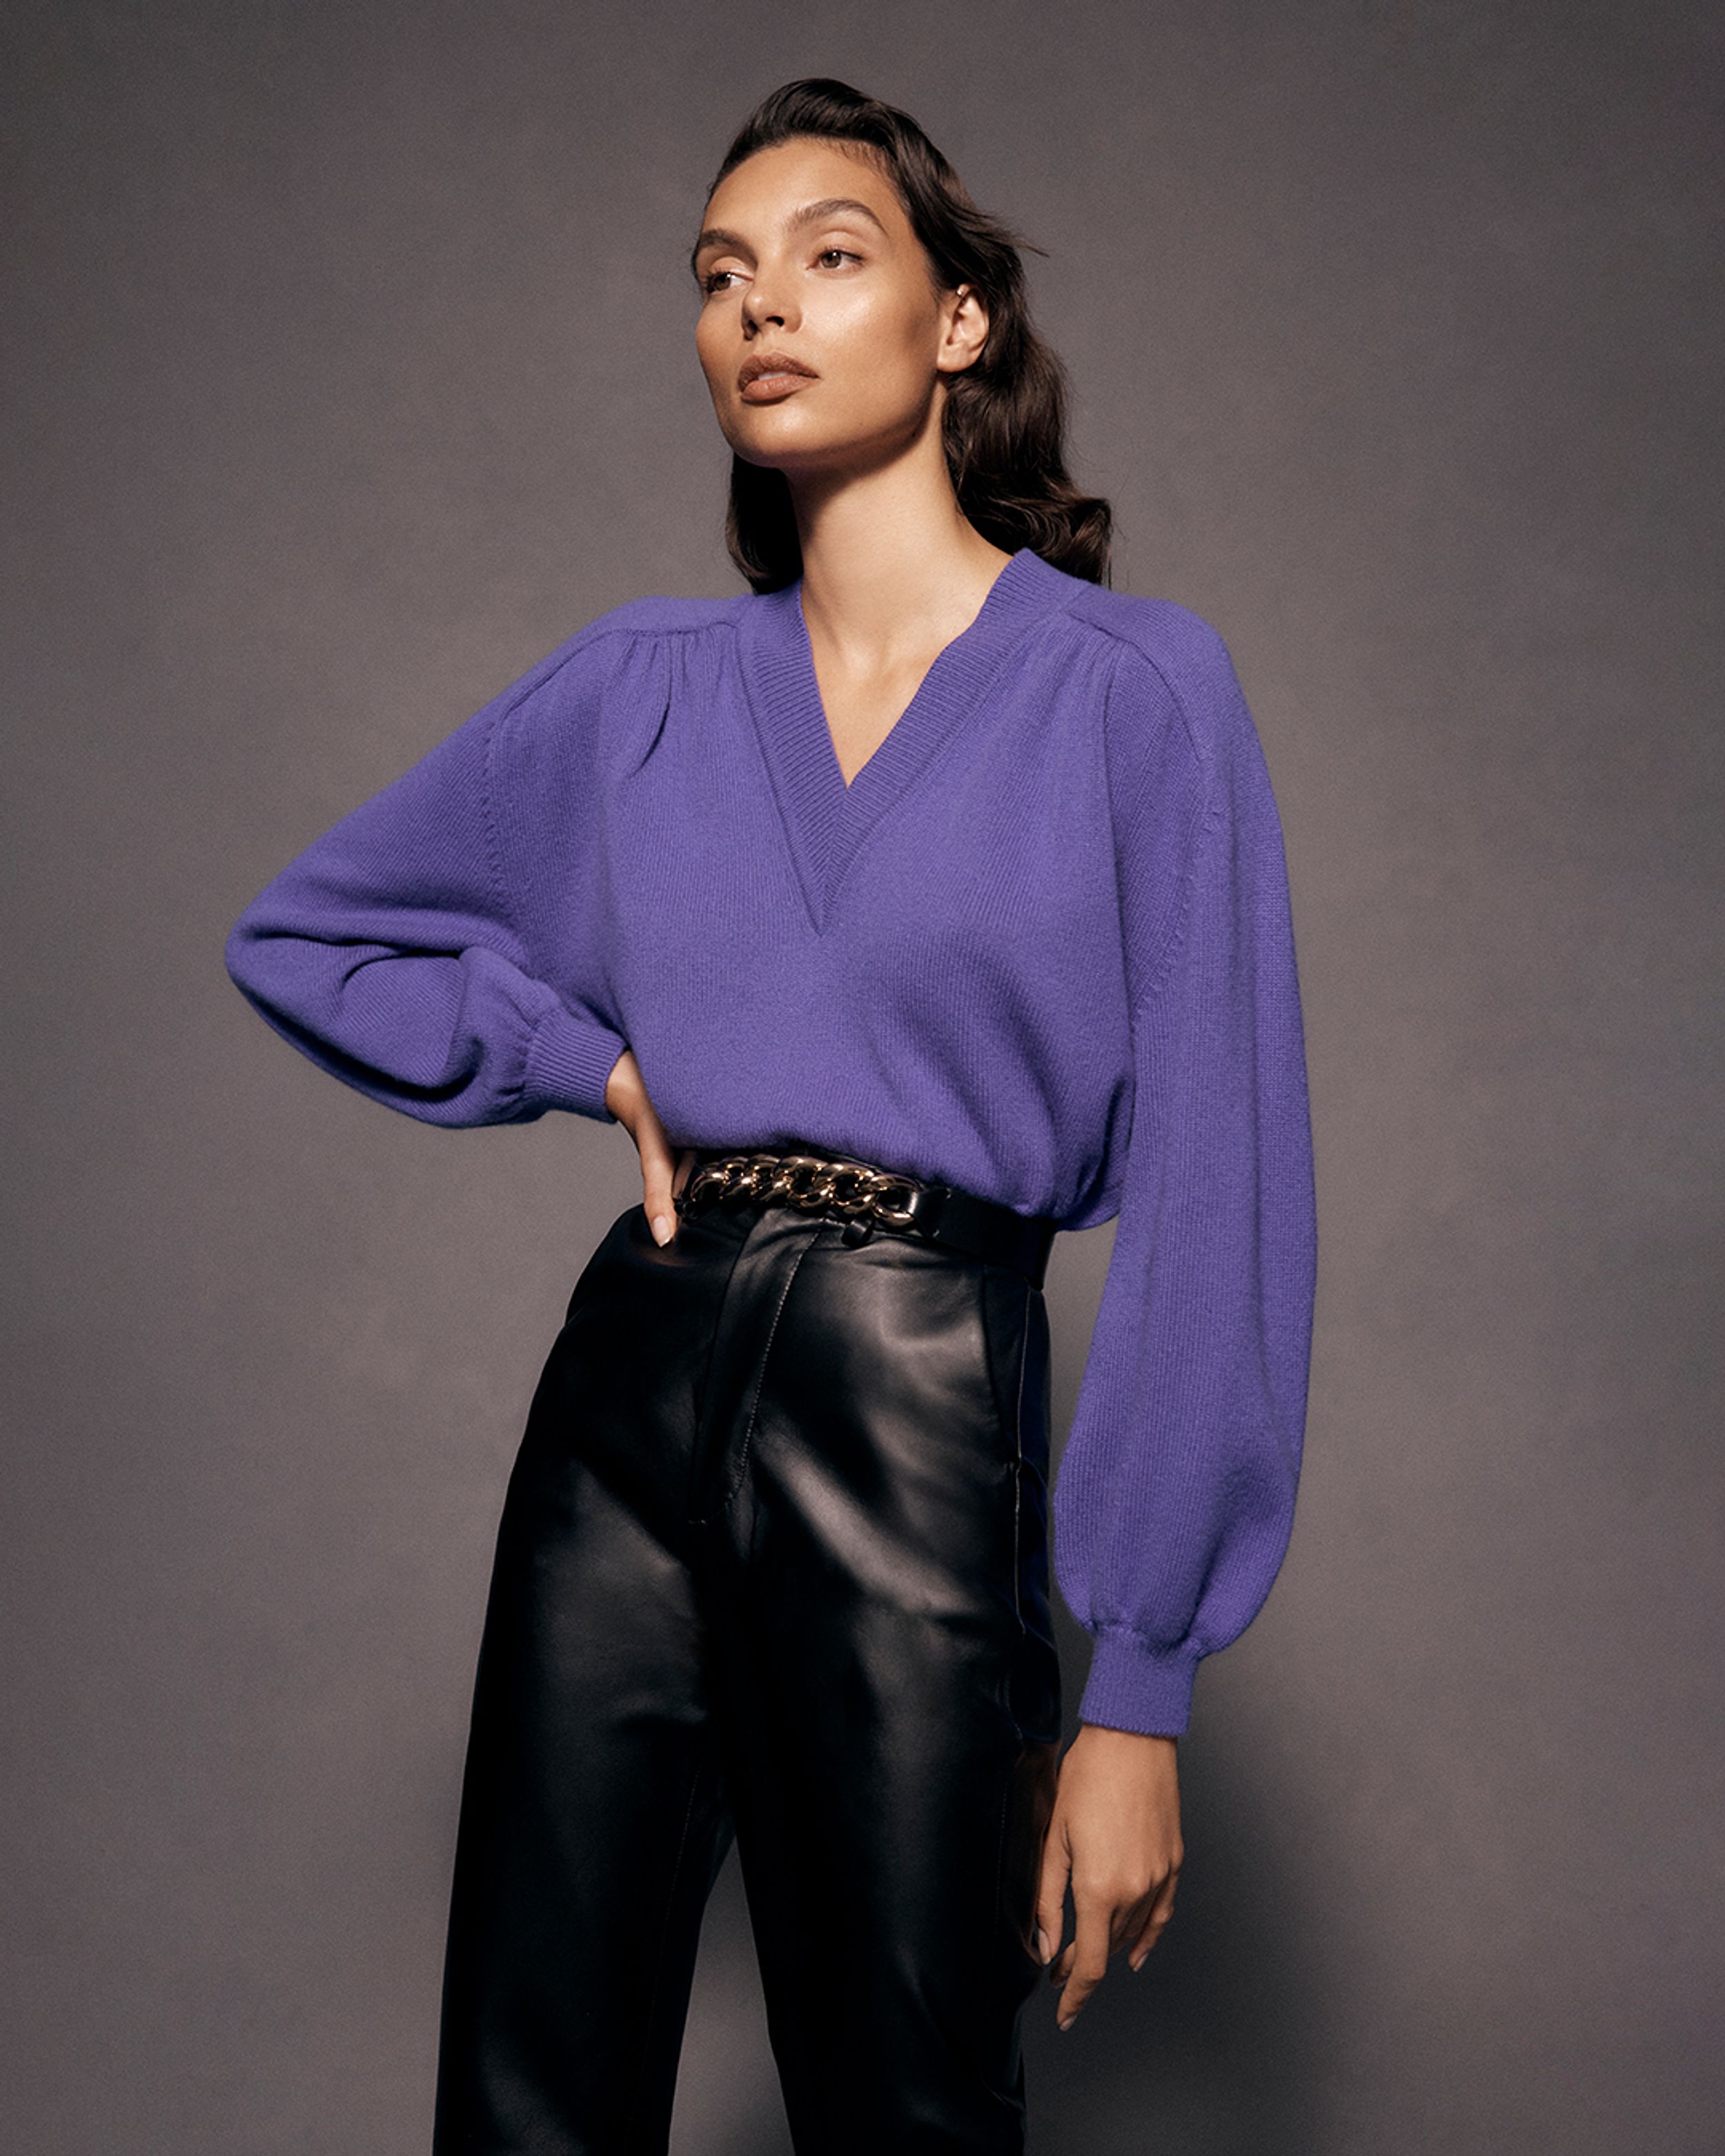 Brunette model posing with one hand on hips wearing a purple v-neck sweater and leather trousers